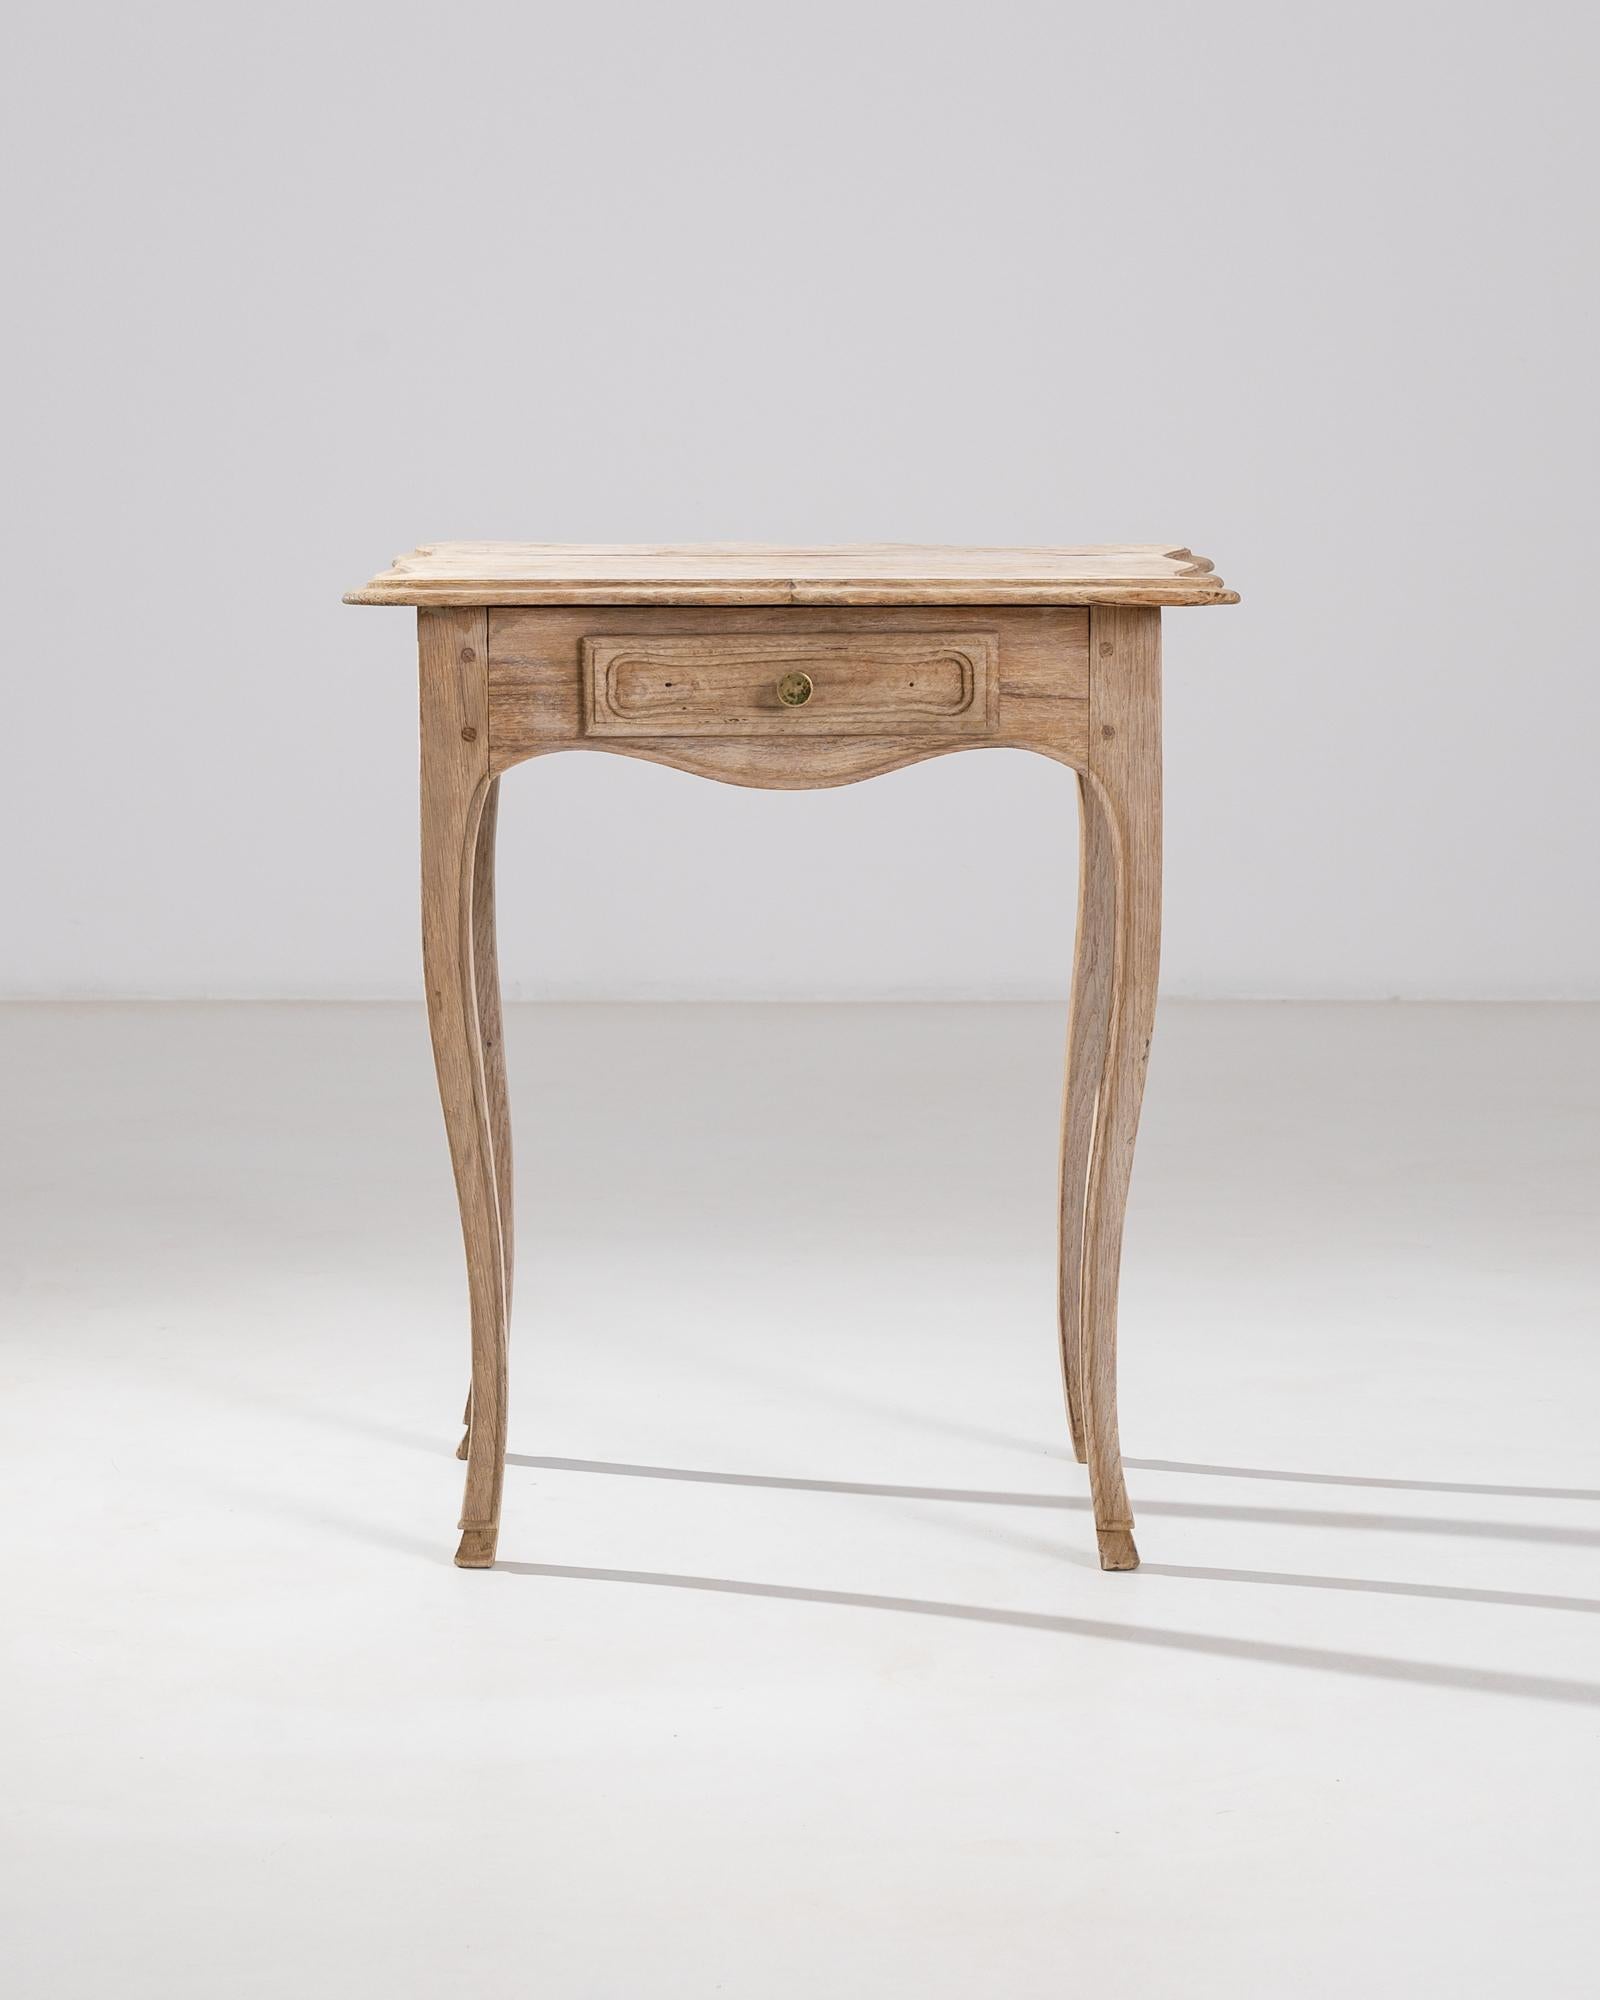 An antique bleached oak table from France with distinctive curved legs. Stylish and practical with a versatile shape, four limbs stretch to support the scalloped apron, set with a little drawer, and a softly beveled tabletop. 

Perched on cabriole